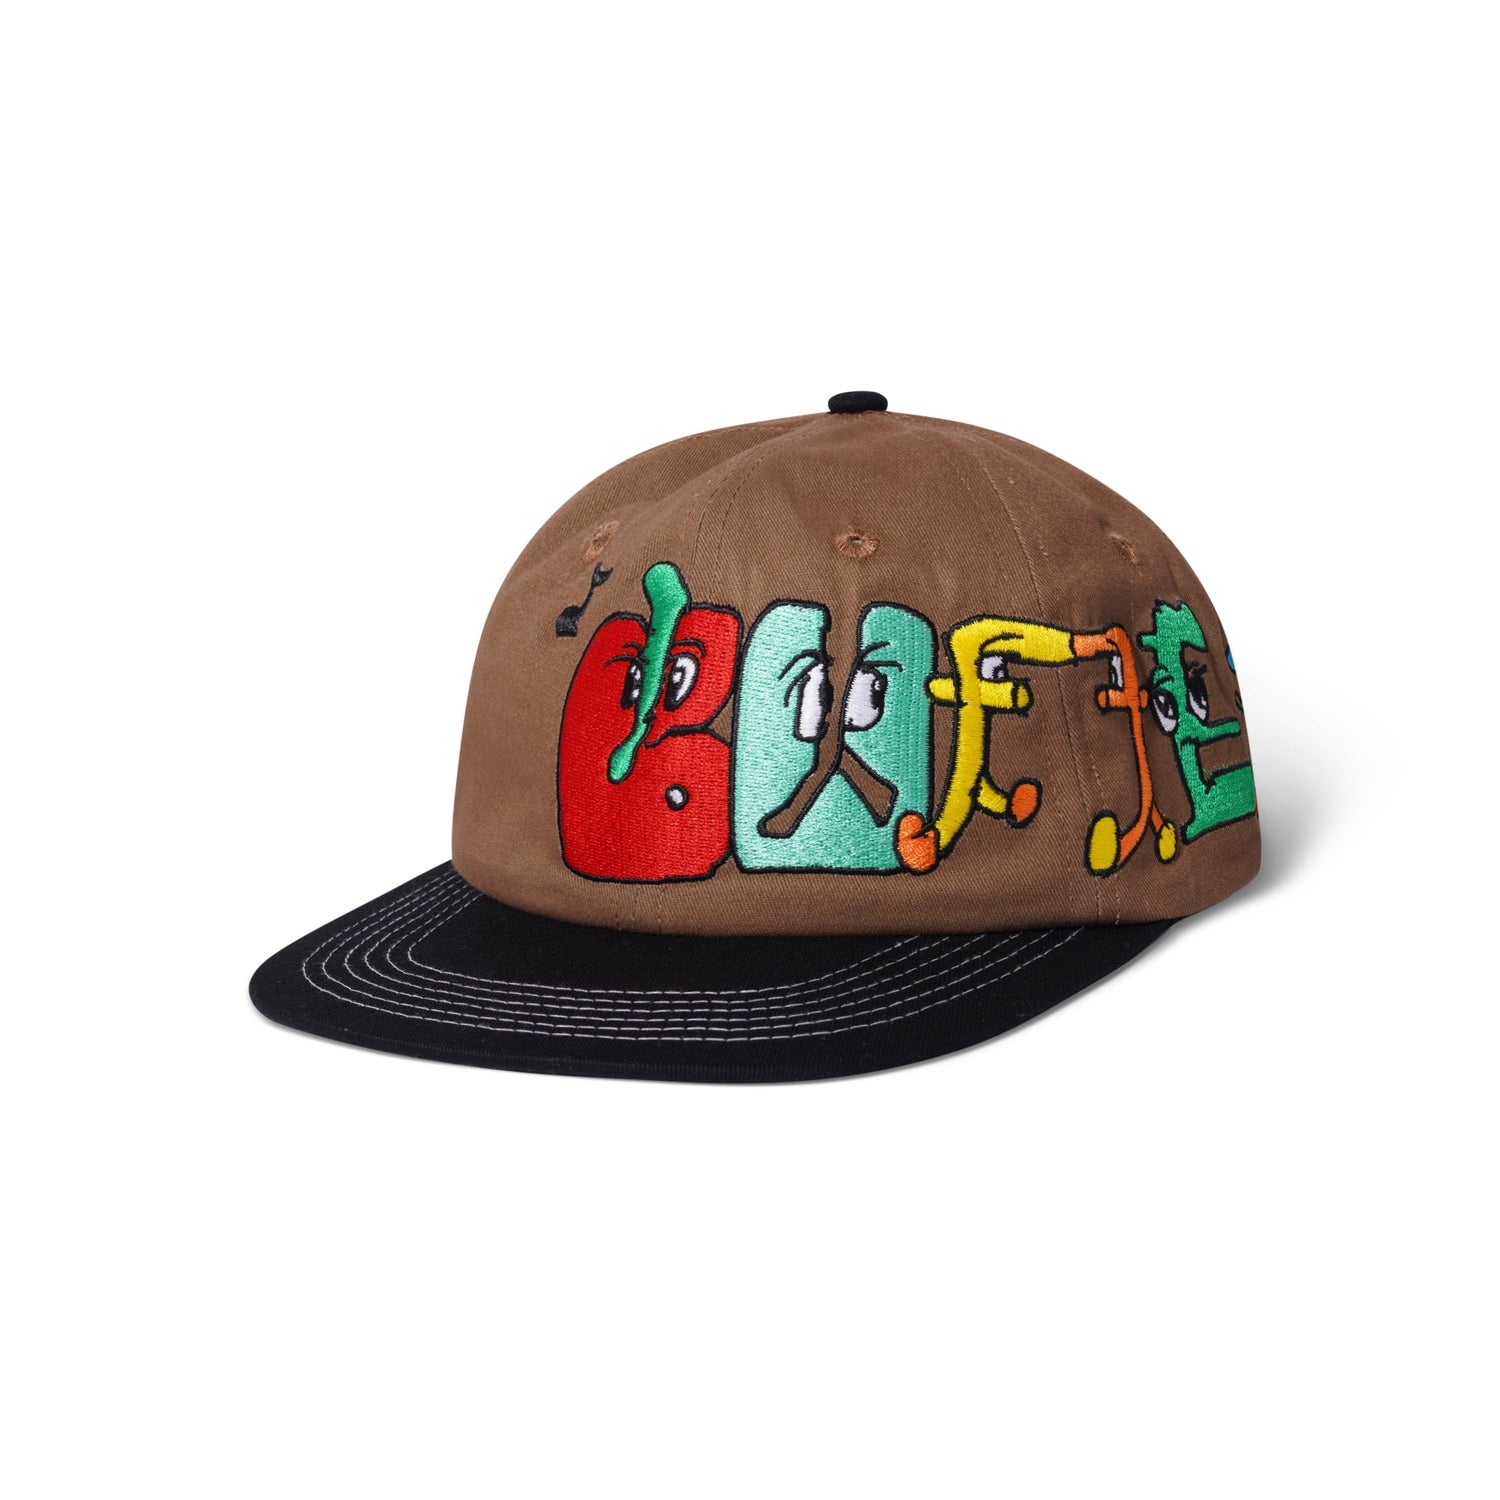 Butter Goods Zorched 6 Panel Cap Brown/Black